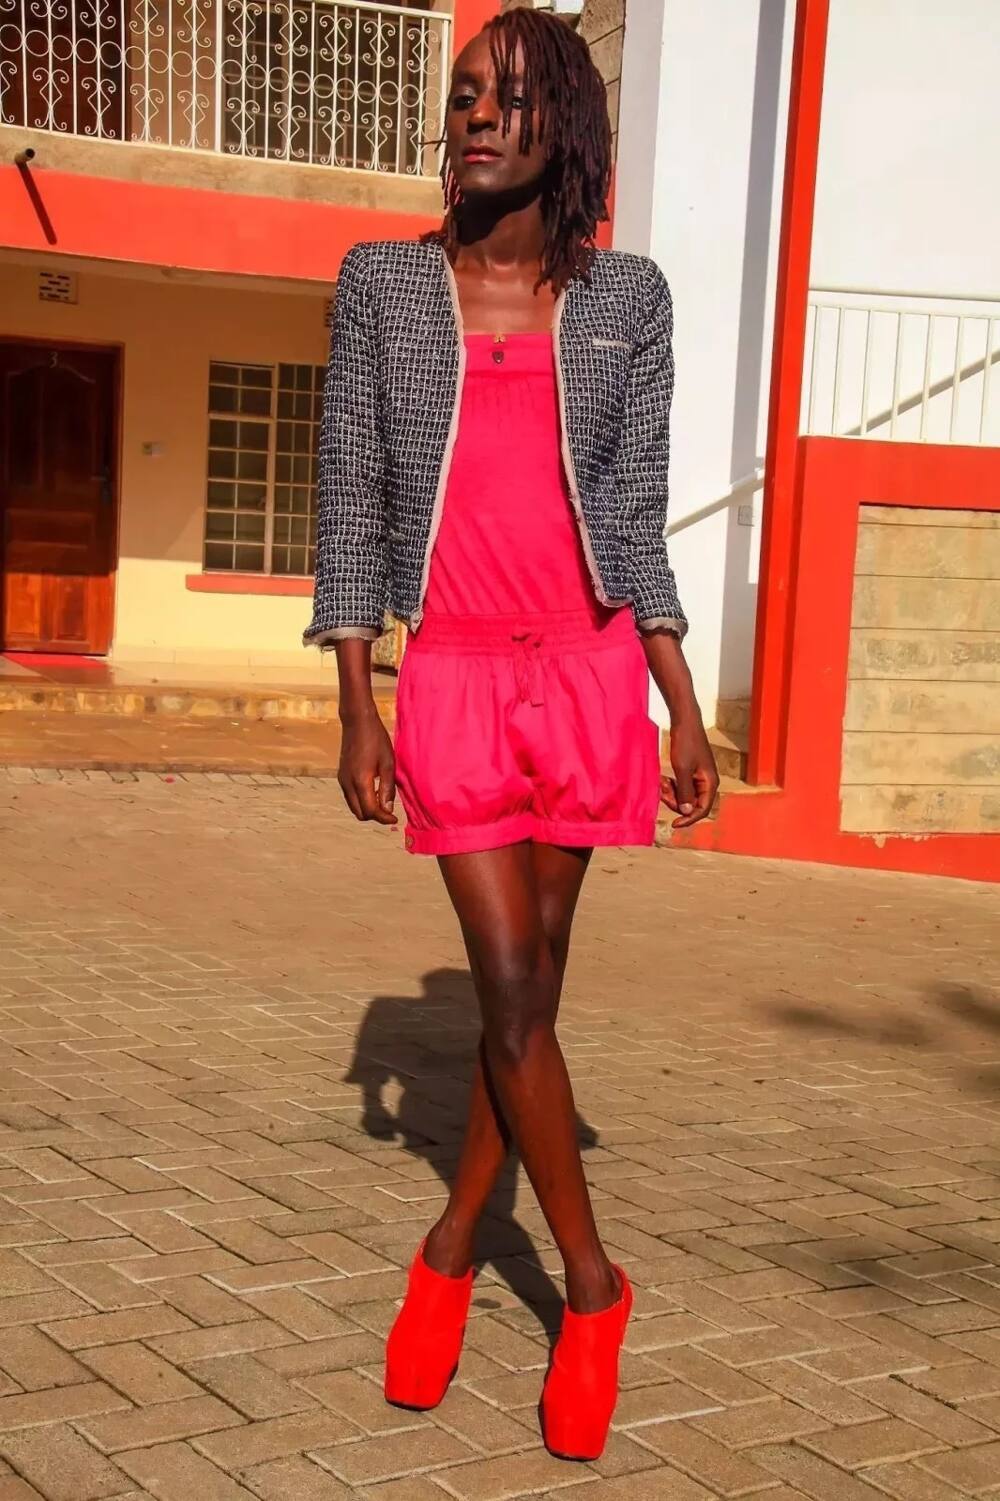 THEN AND NOW: Photos Of Kenya's Second Man To Change Into Woman